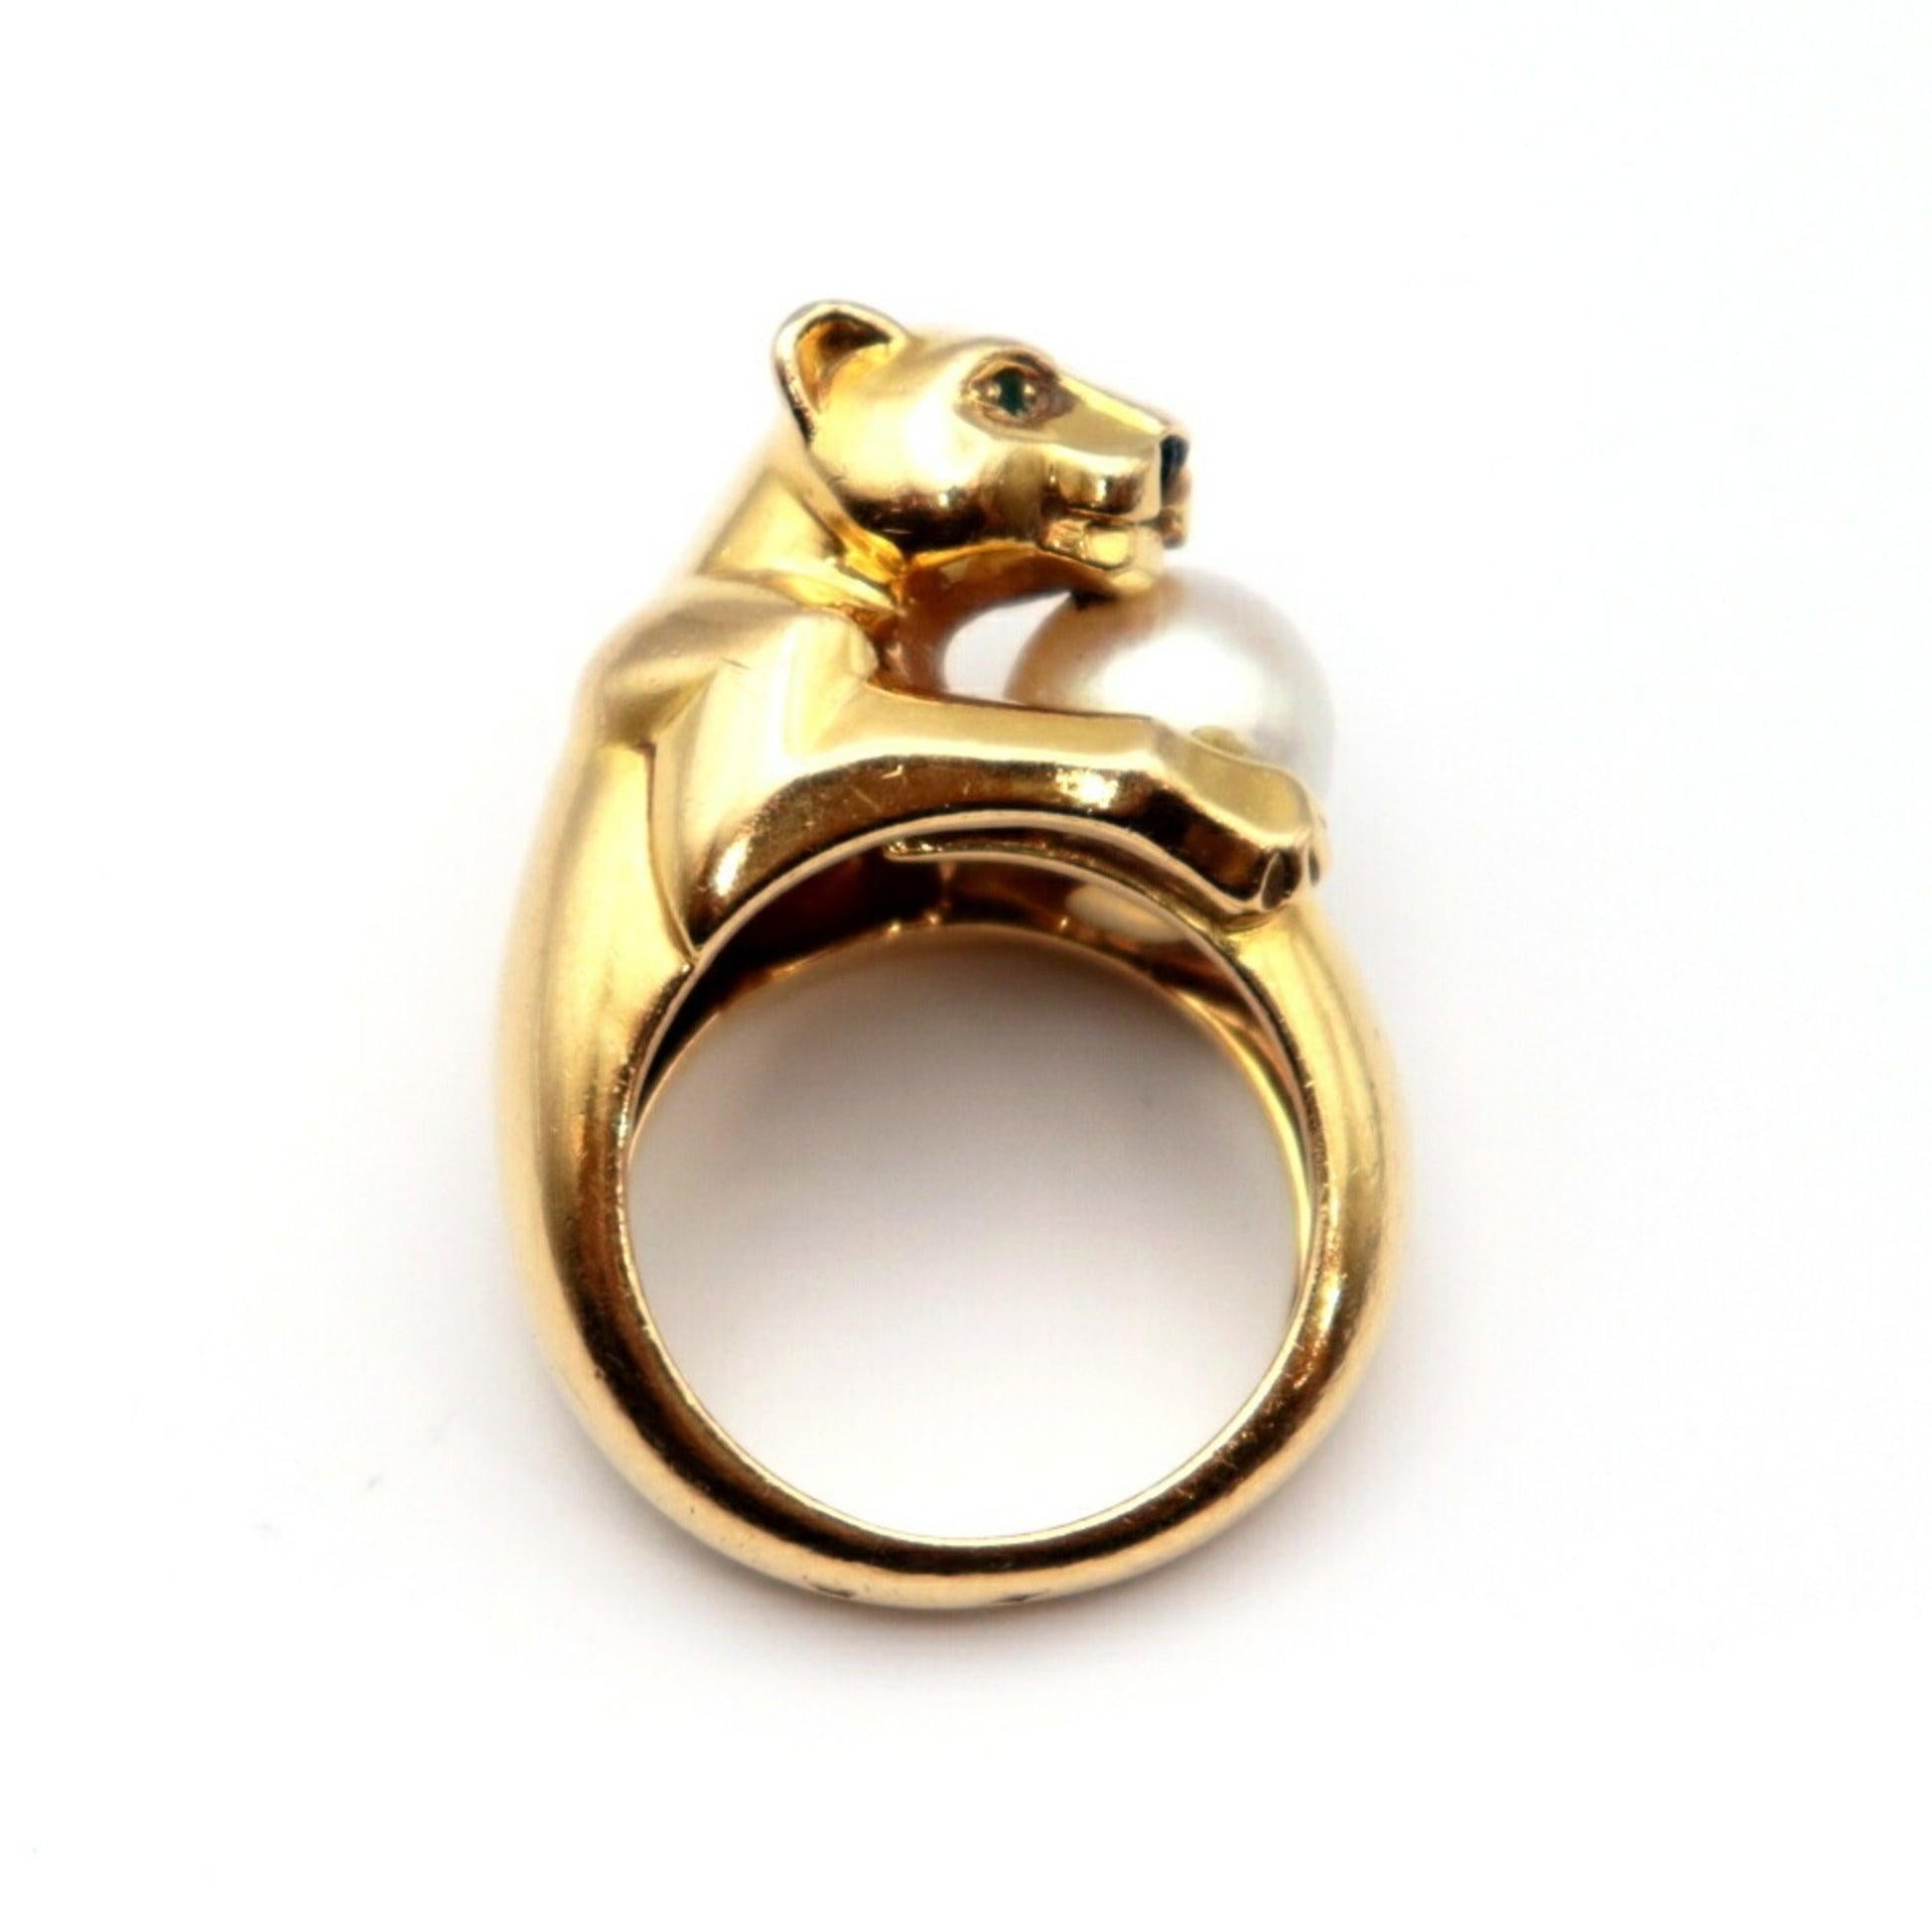 Cartier Vedra Panther Pearl, Emerald, Onyx Ring in 18K Yellow Gold For Sale 1